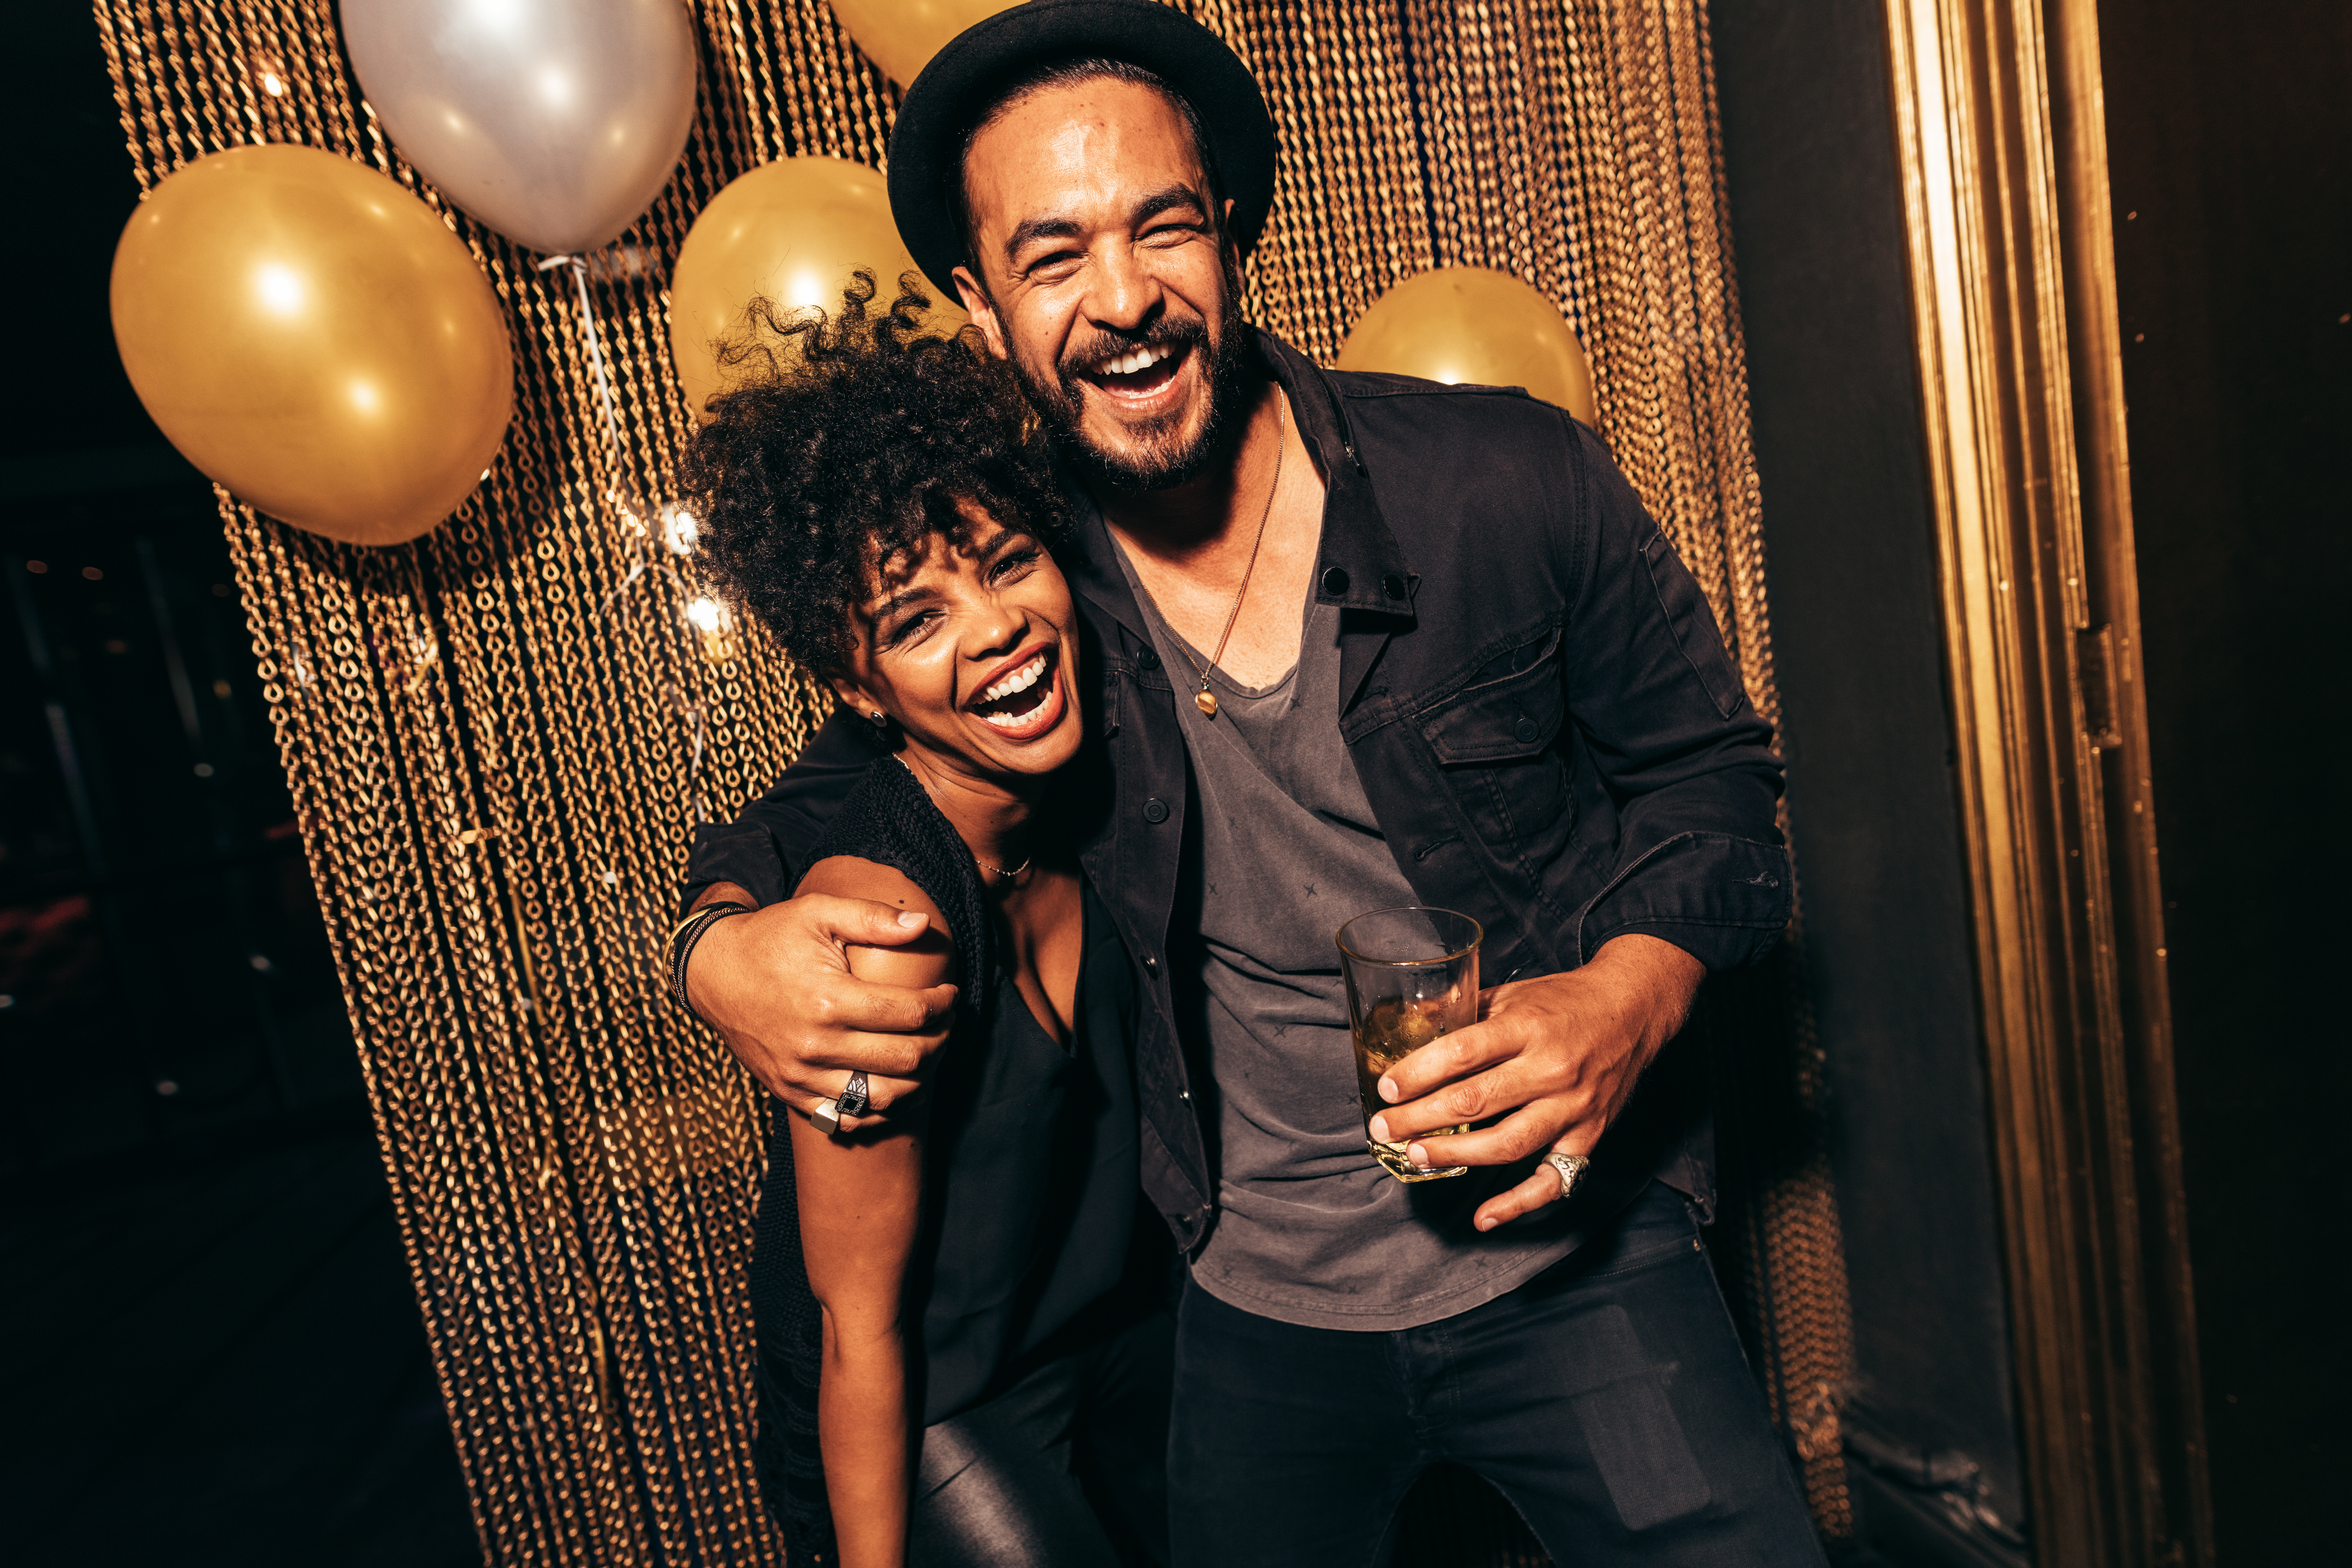 A young couple smiling for a photo at a party | Source: Shutterstock